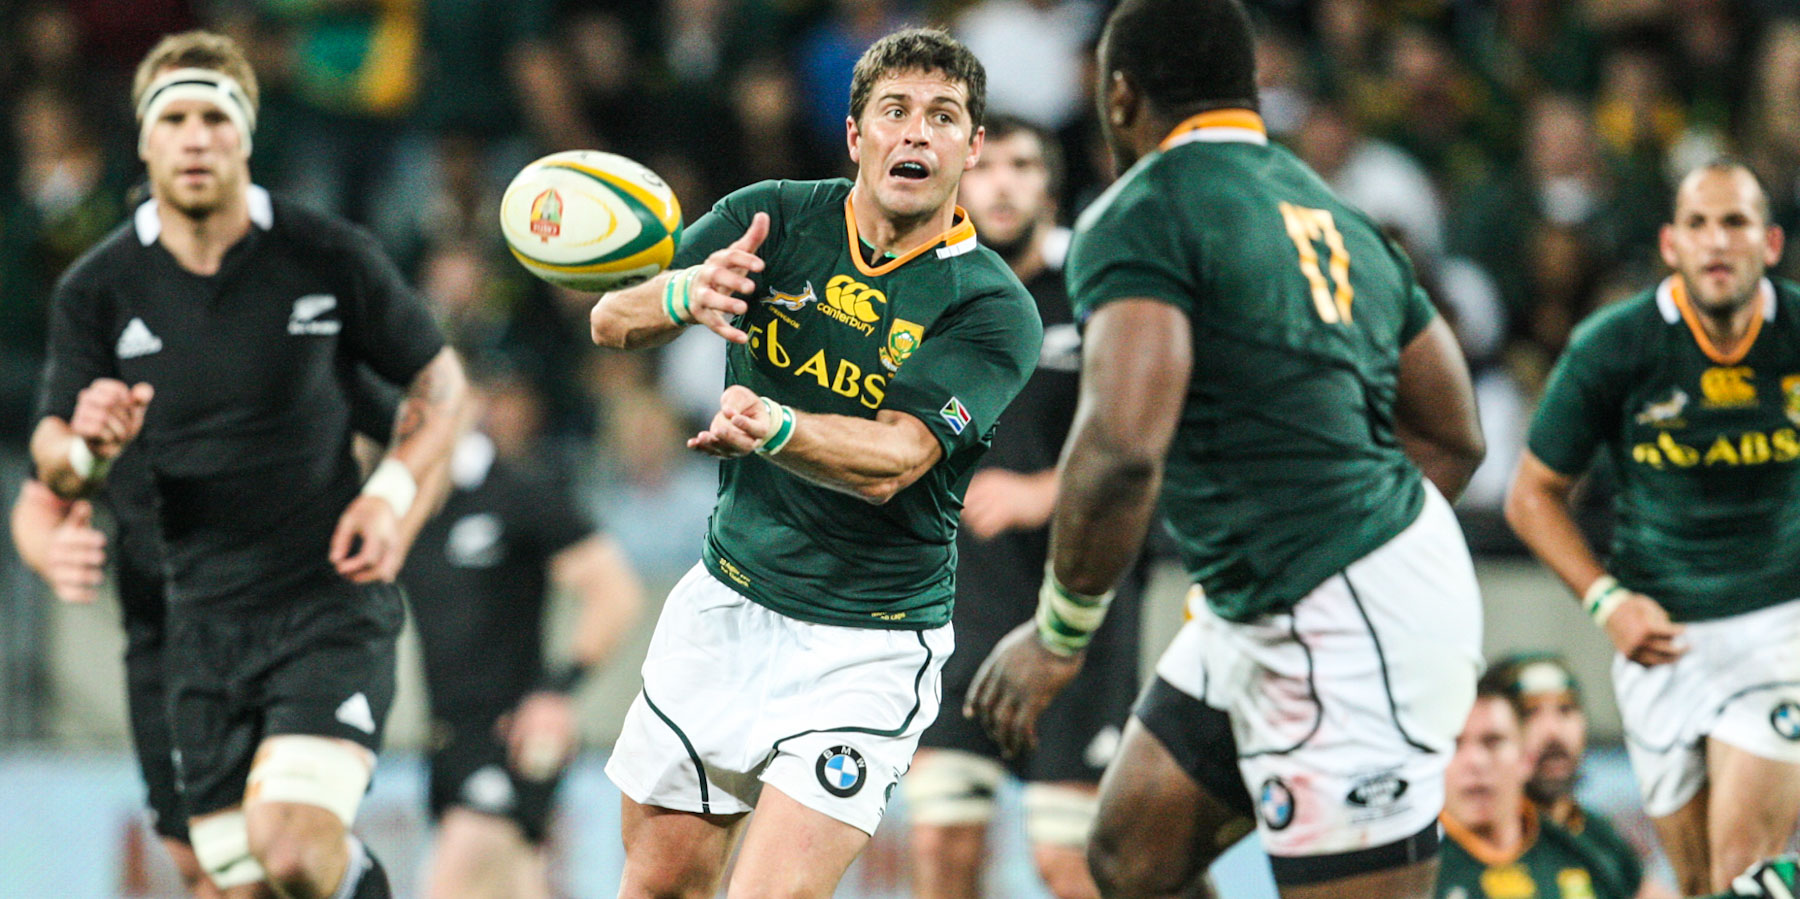 In 2011, in PE, Steyn again scored all the Boks' points in their 18-5 win over the All Blacks (5 pens, 1 drop).